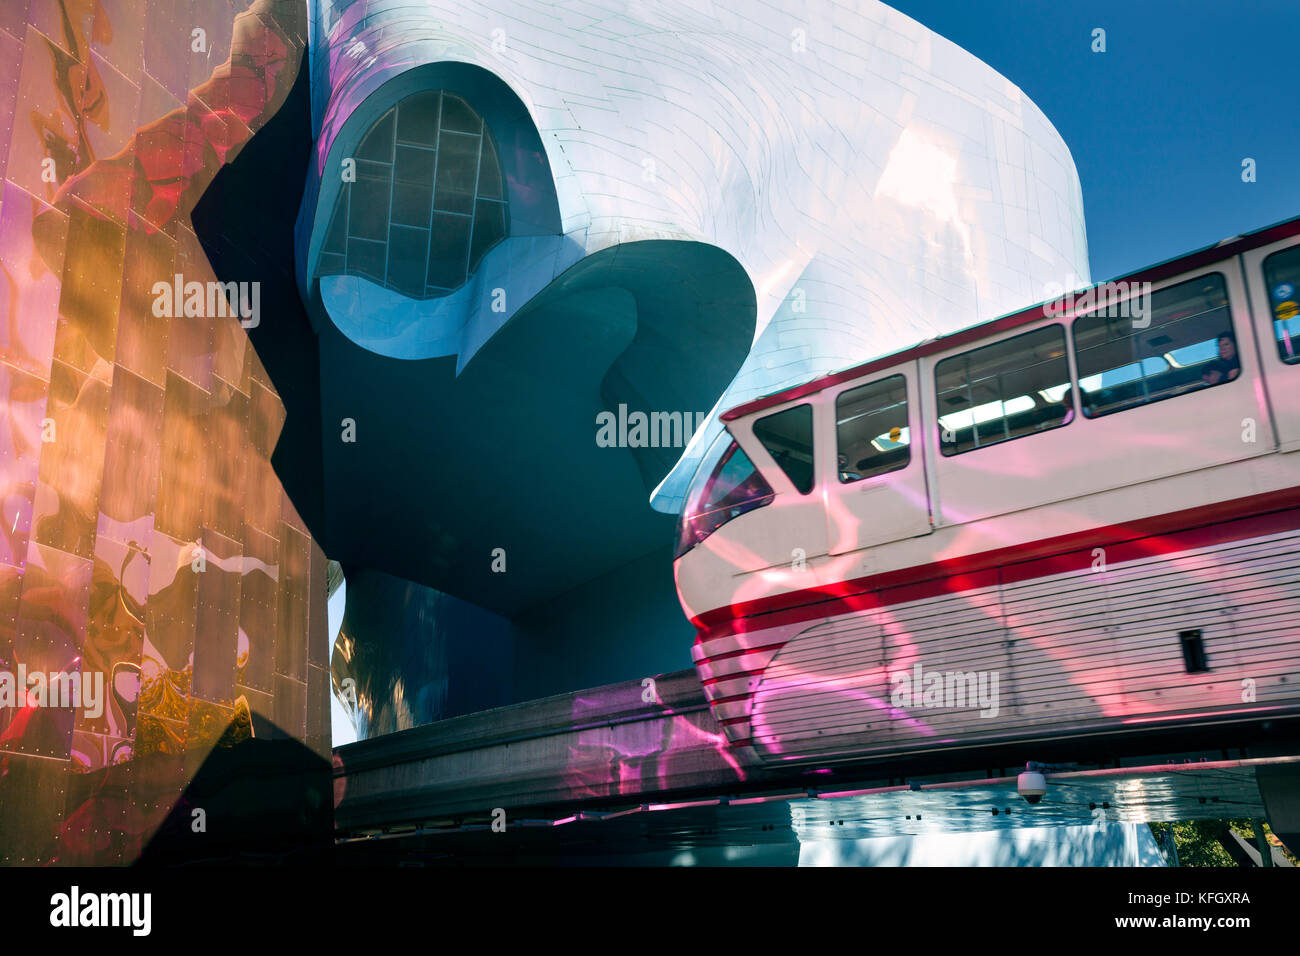 WA14138-00...WASHINGTON - The Monorail entering the tunnel through the Museum Of Pop Culture  located at the Seattle Center. Stock Photo